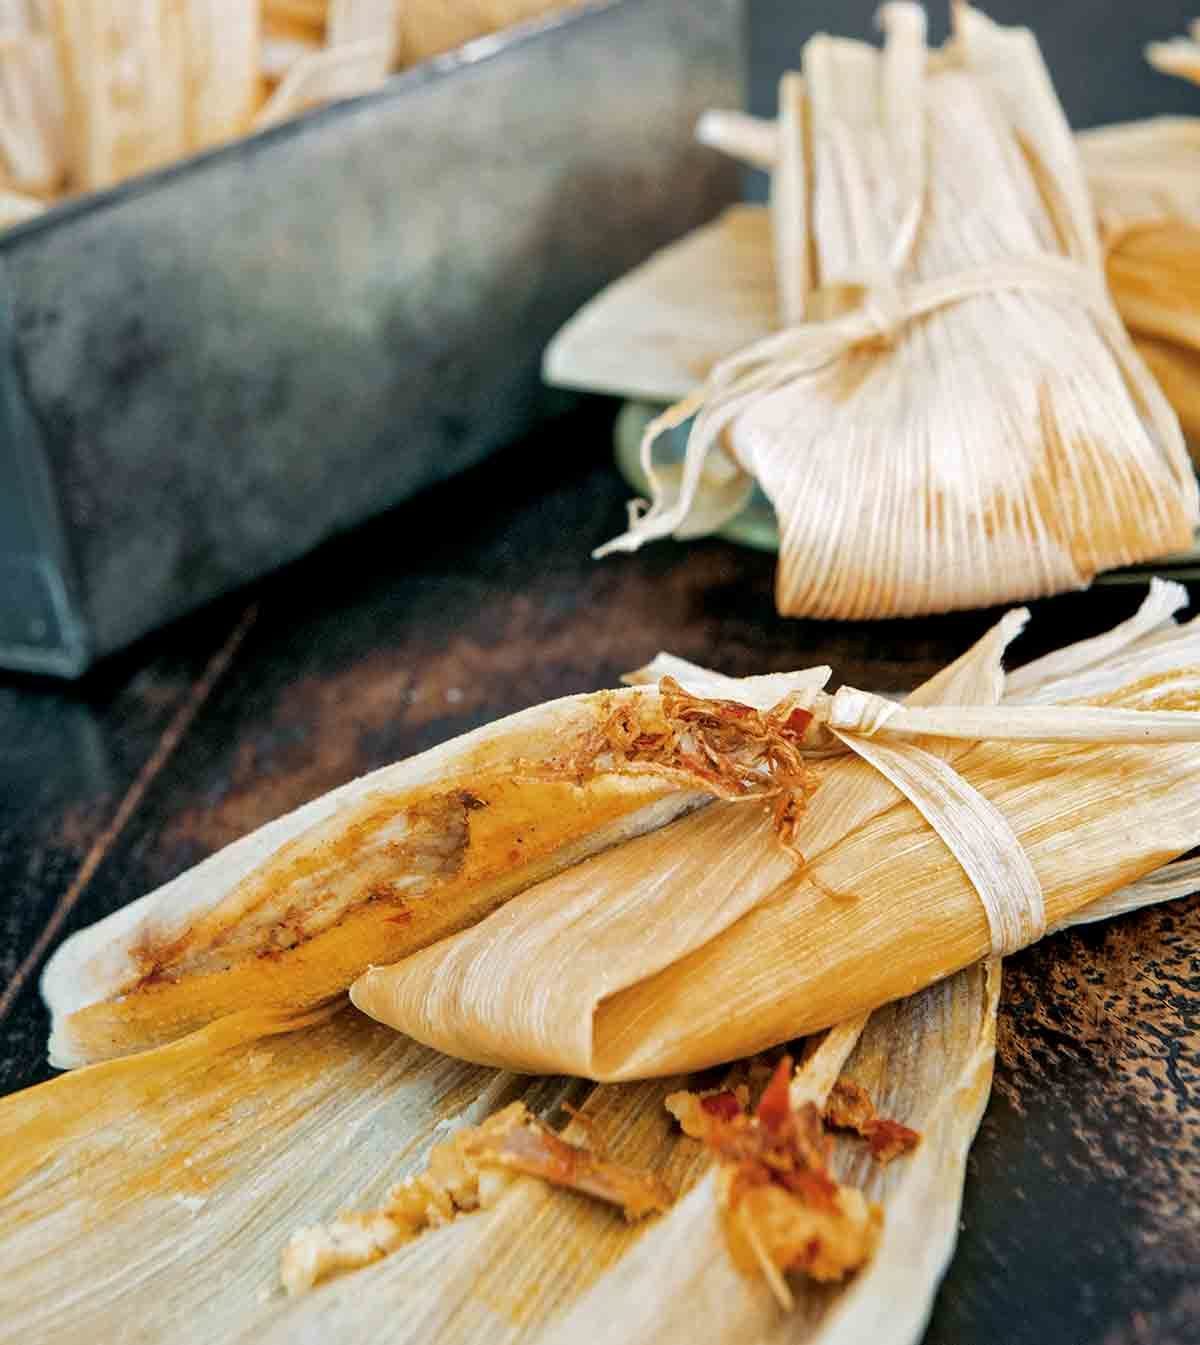 Two wrapped tamales on top of an open corn husk